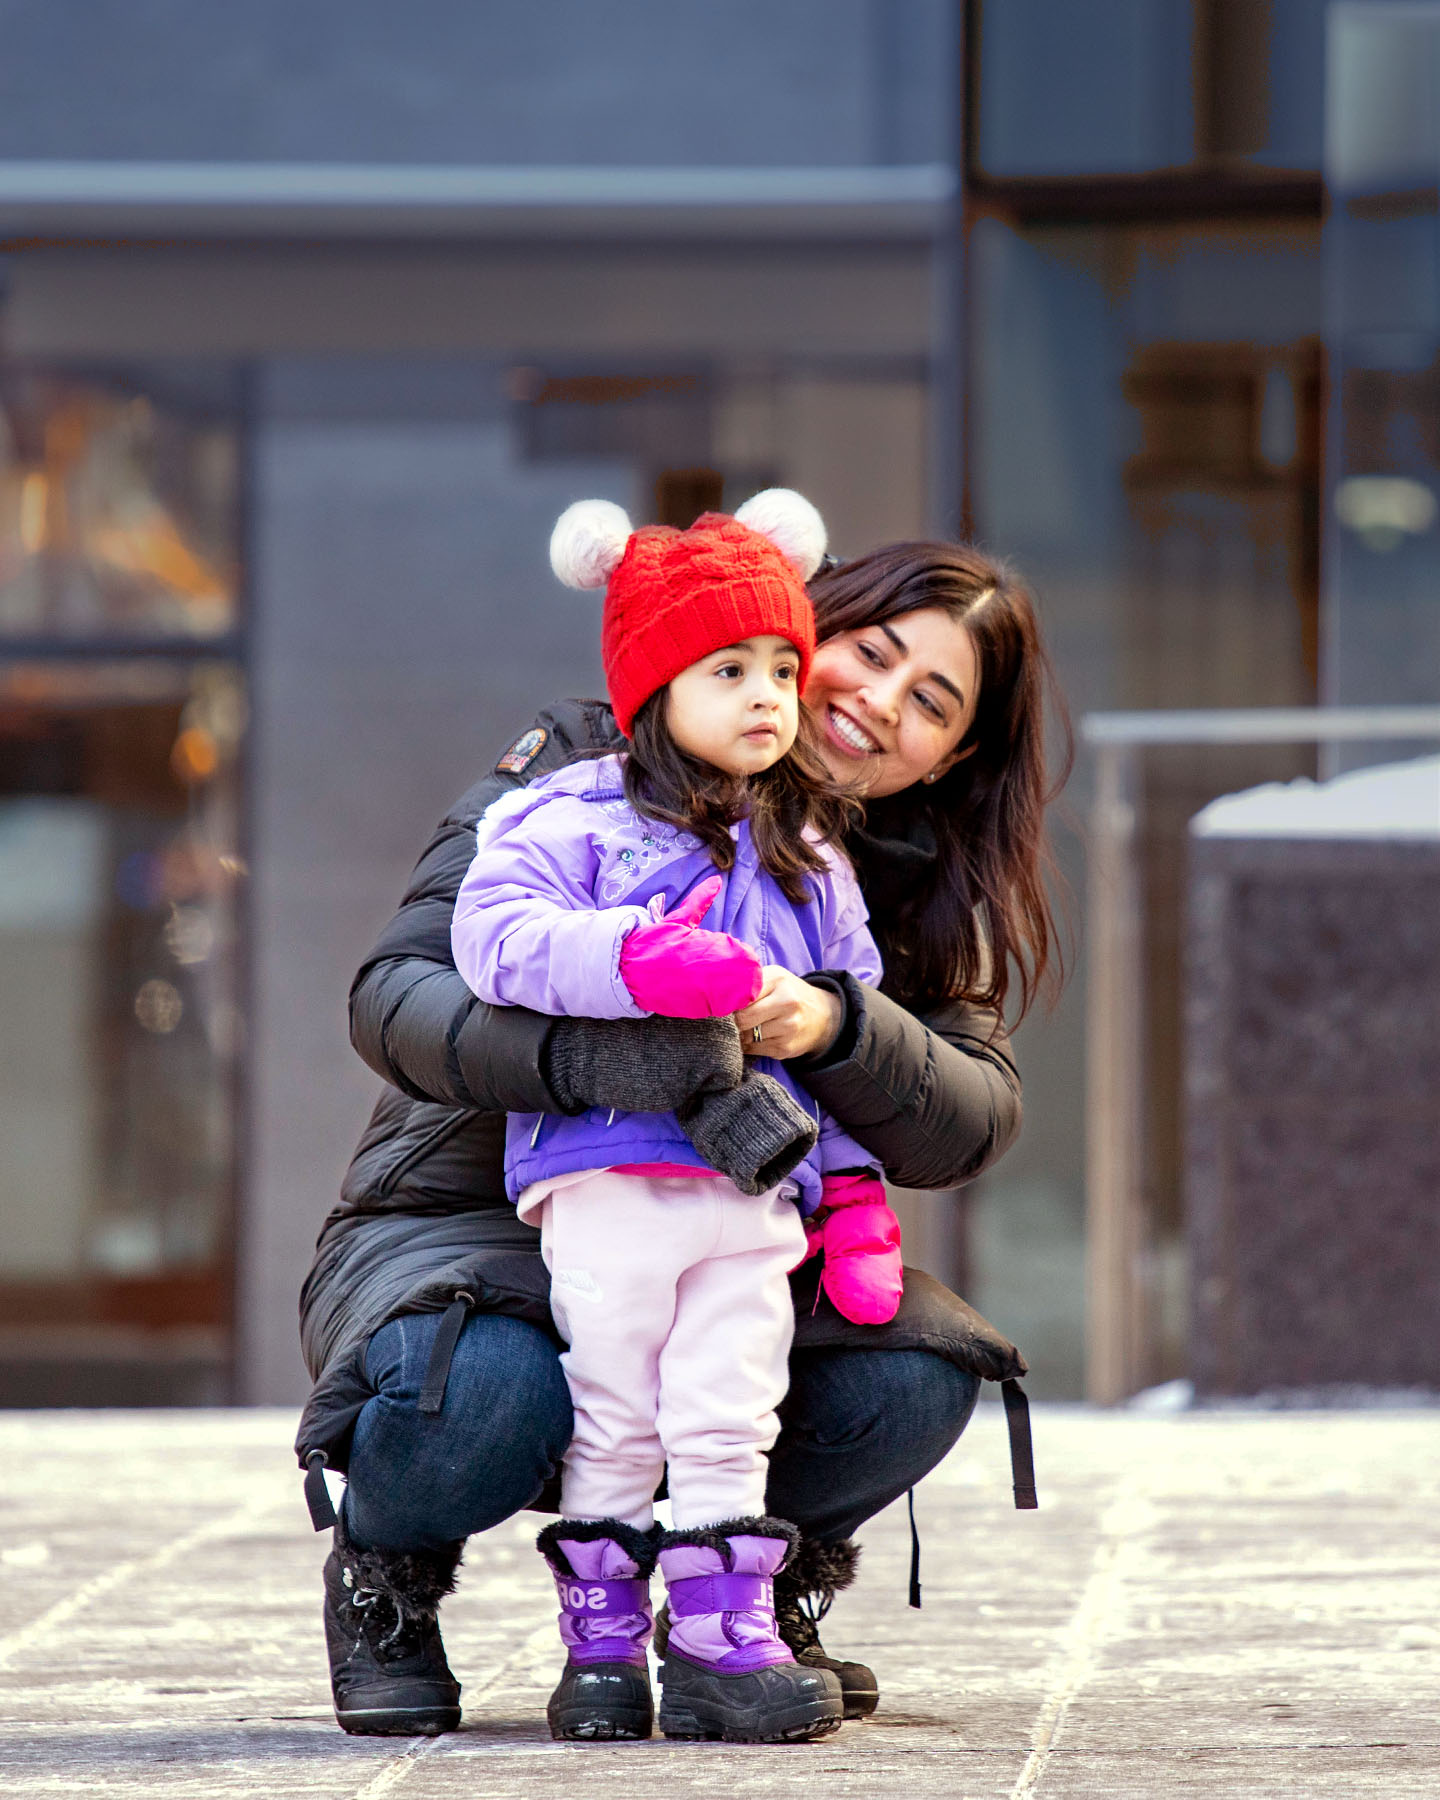 Picture of a mother and a girl in front of a building wearing jackets